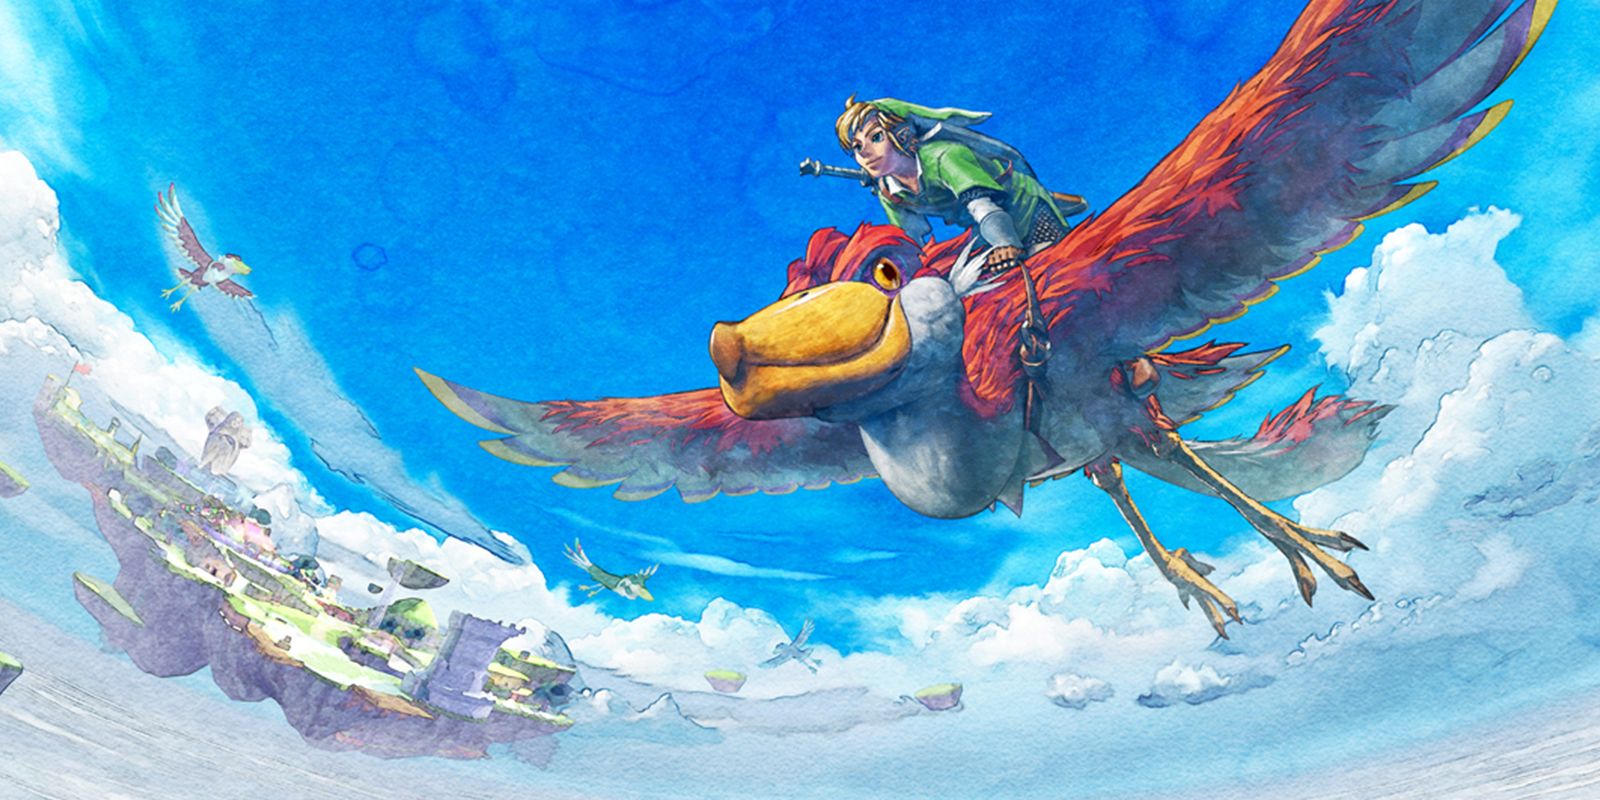 Key art of Link riding his Loftwing in Skyward Sword. Several other Loftwings can be seen in the background flying around Skyloft, the floating town where Link grew up.